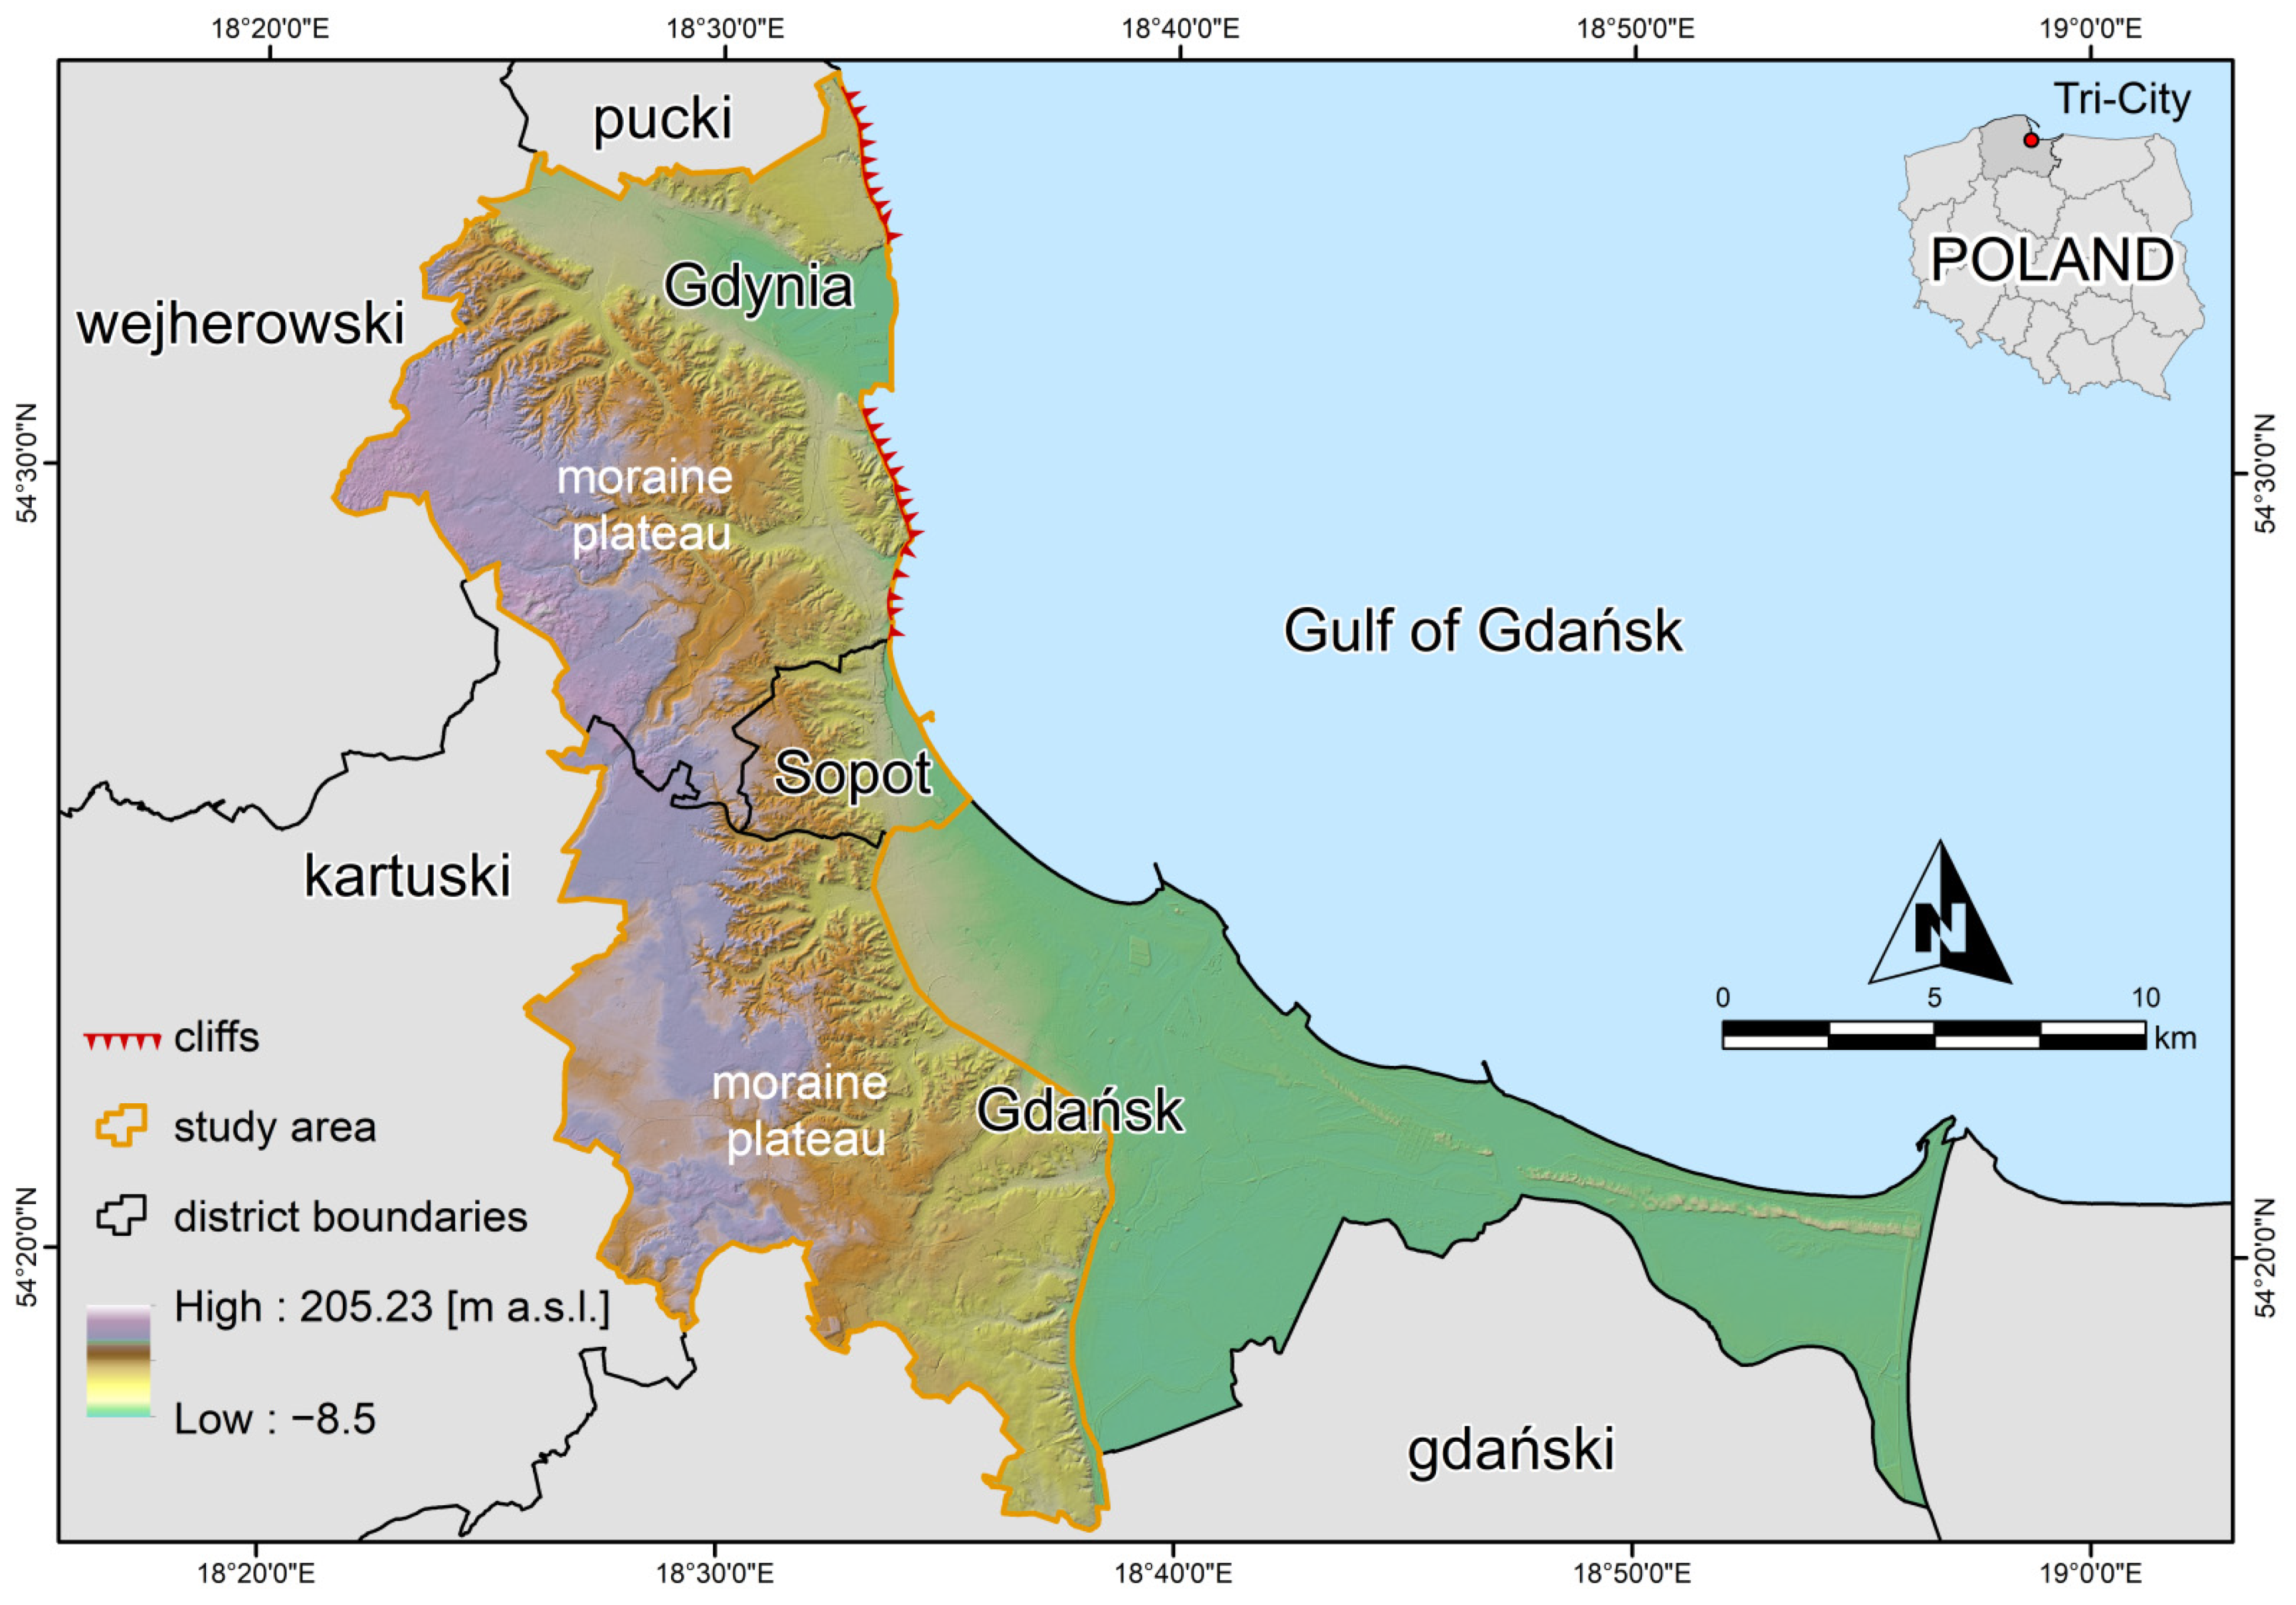 GeoHazards | Free Full-Text | GIS-Based Landslide Susceptibility Modelling  in Urbanized Areas: A Case Study of the Tri-City Area of Poland